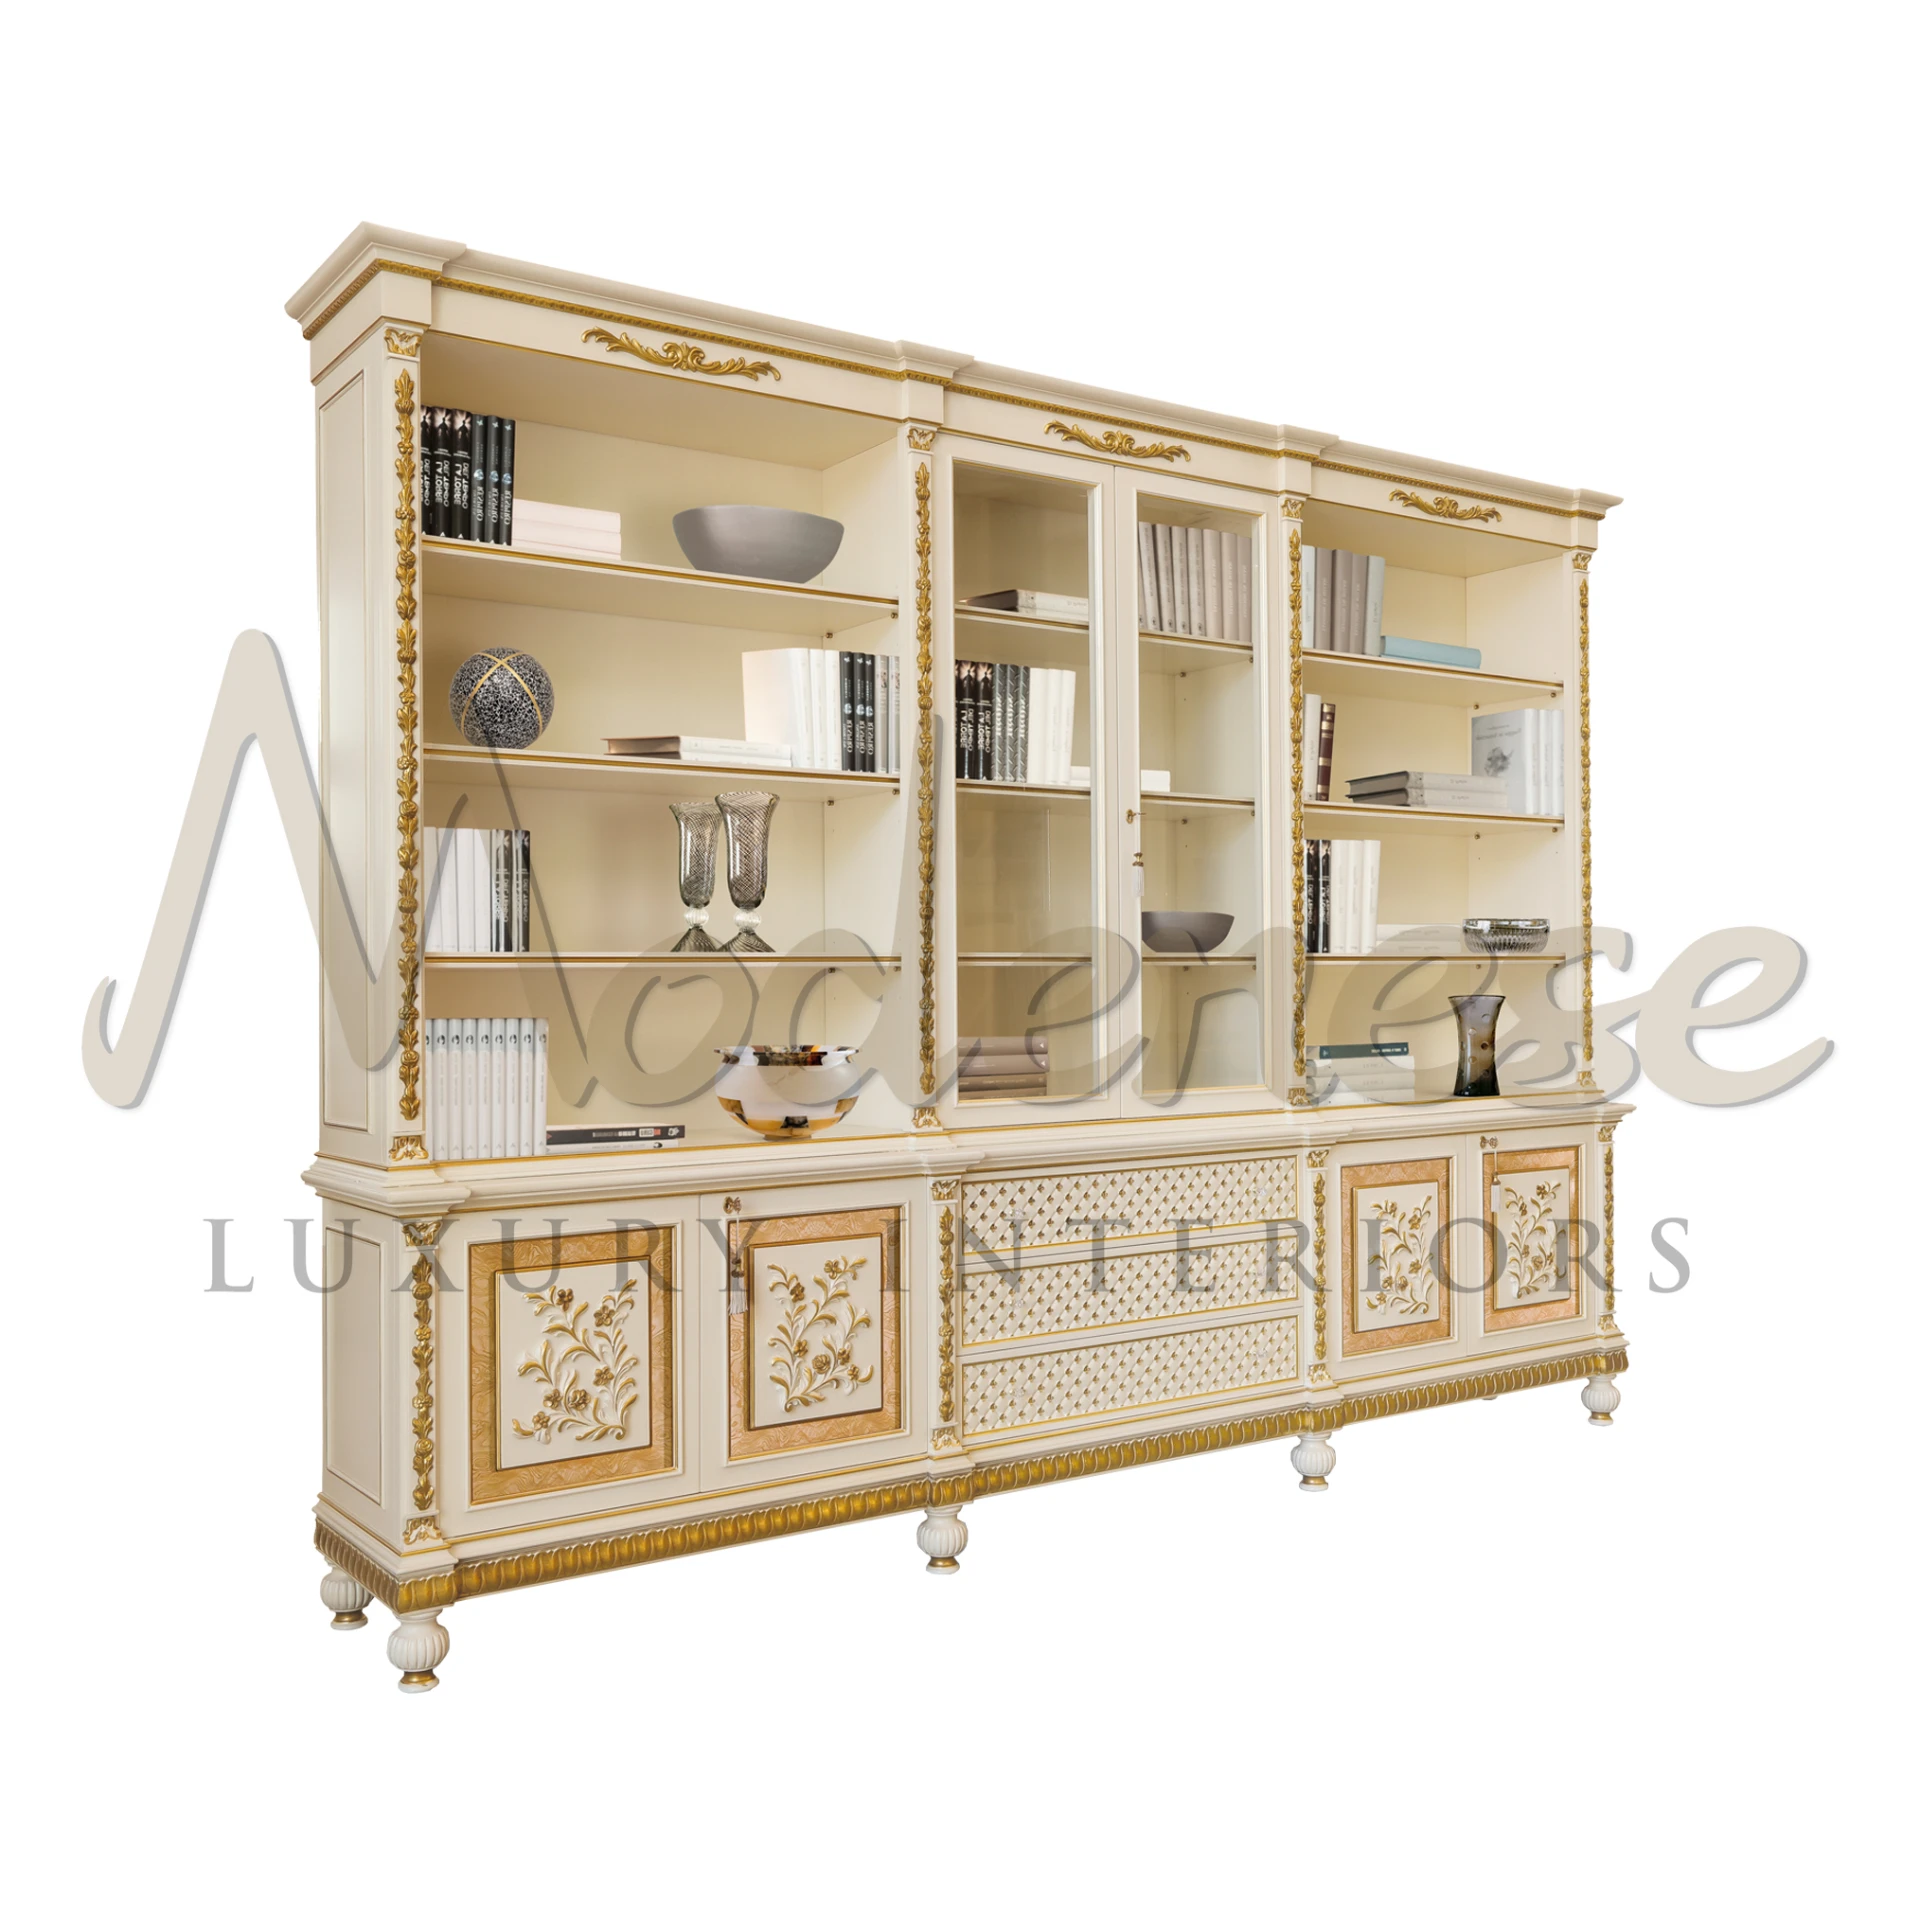 Product View with Clear Background - Delightful 6-Doors Bookcase | Luxury Italian Classic Furniture  - Modenese Luxury Furniture